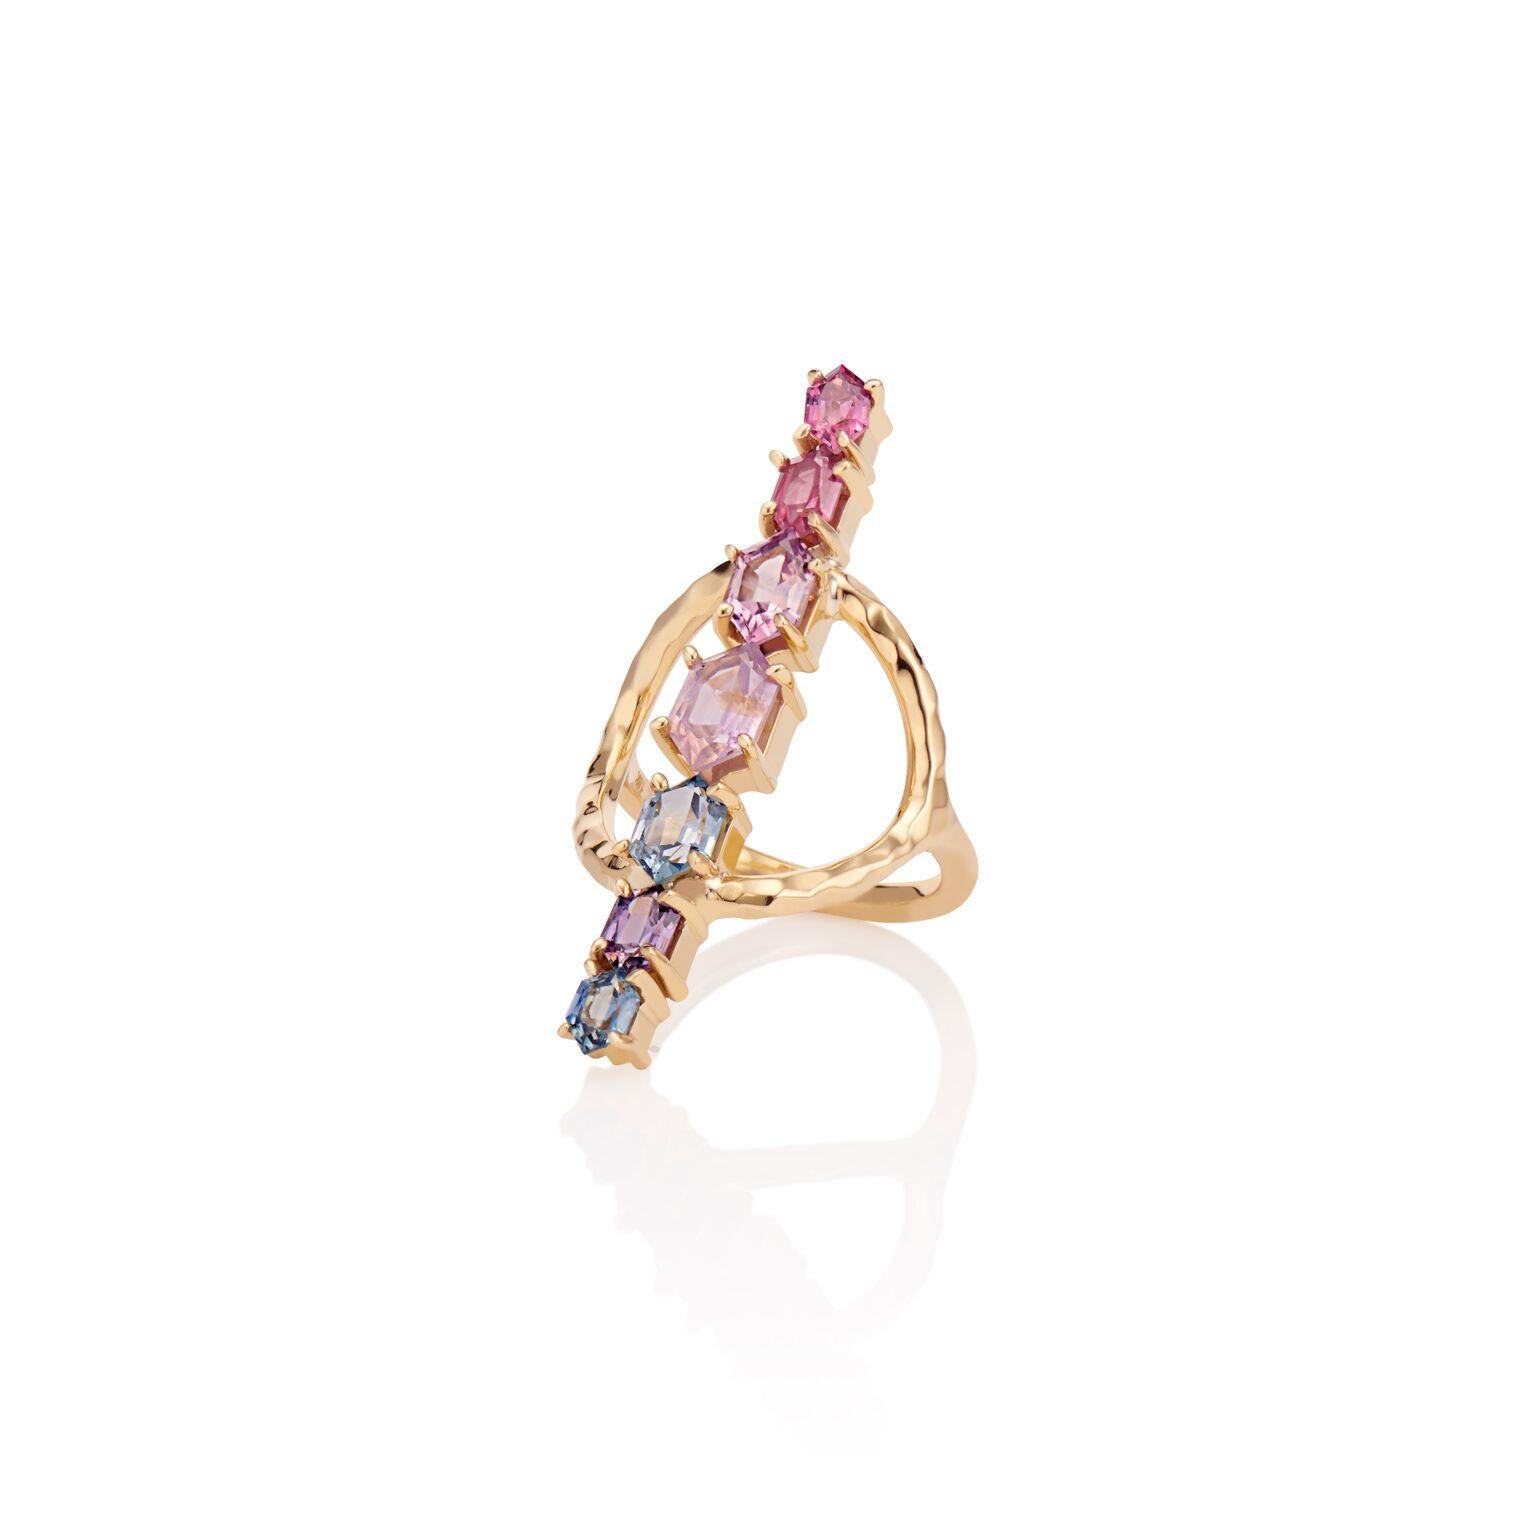 This Ring is 18 Karat Yellow recycled  Gold. It is detailed in approximately 5 Carats of multi-colored Pinks and purple-hued Sapphire. Each stone has been custom-cut by hand to give the stones a unique and one of a kind feel. The total length of the